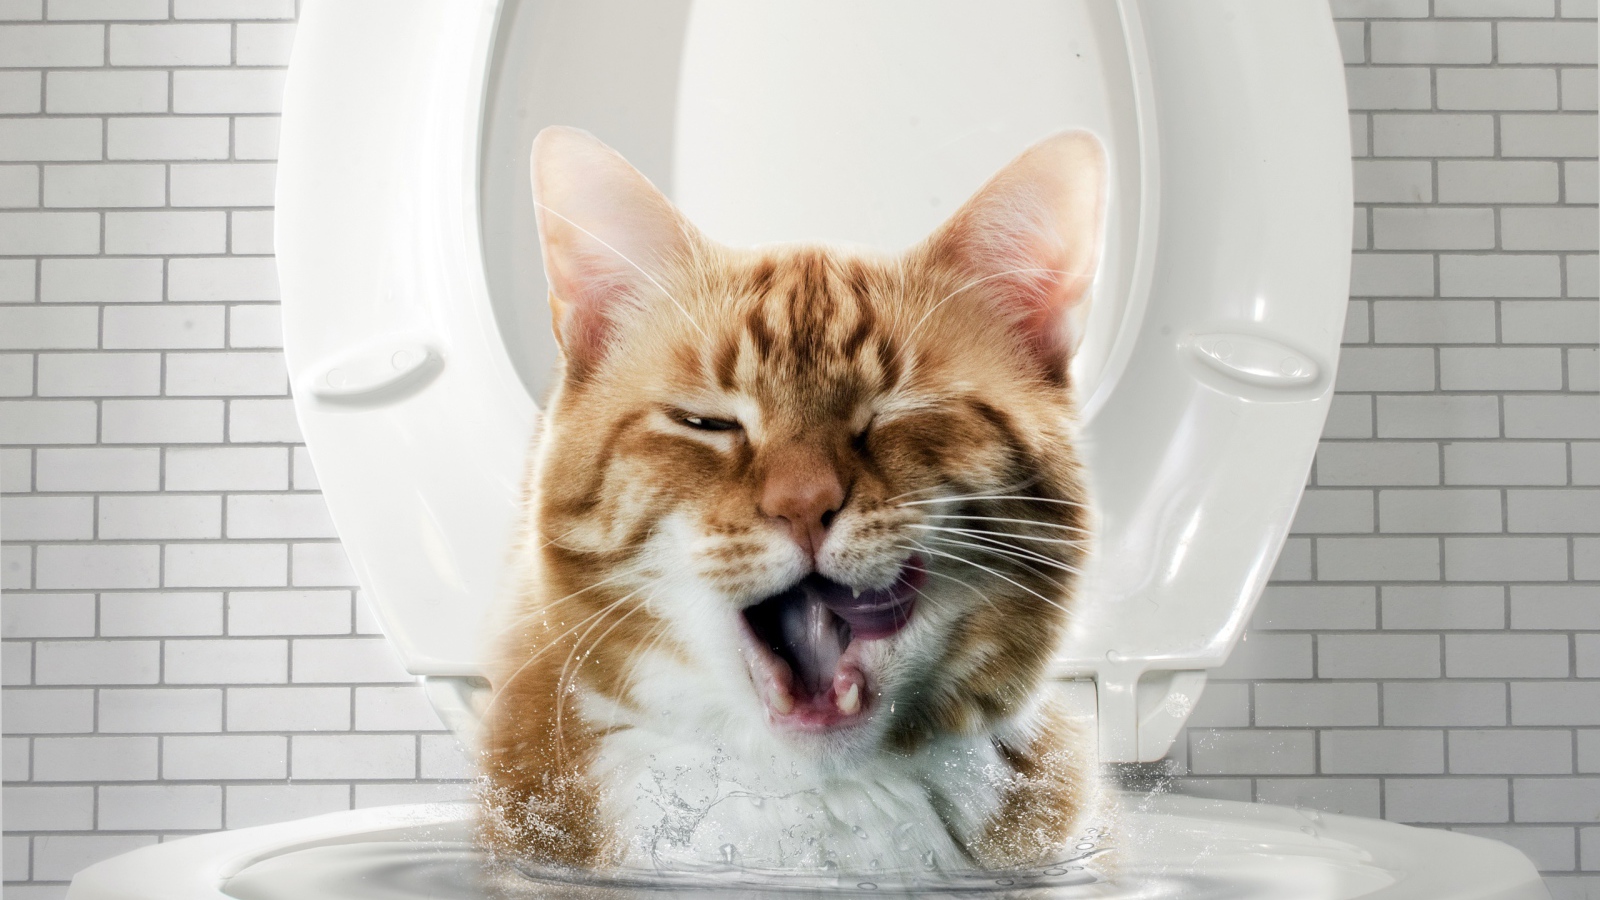 Muzzle red cat peeking from the toilet